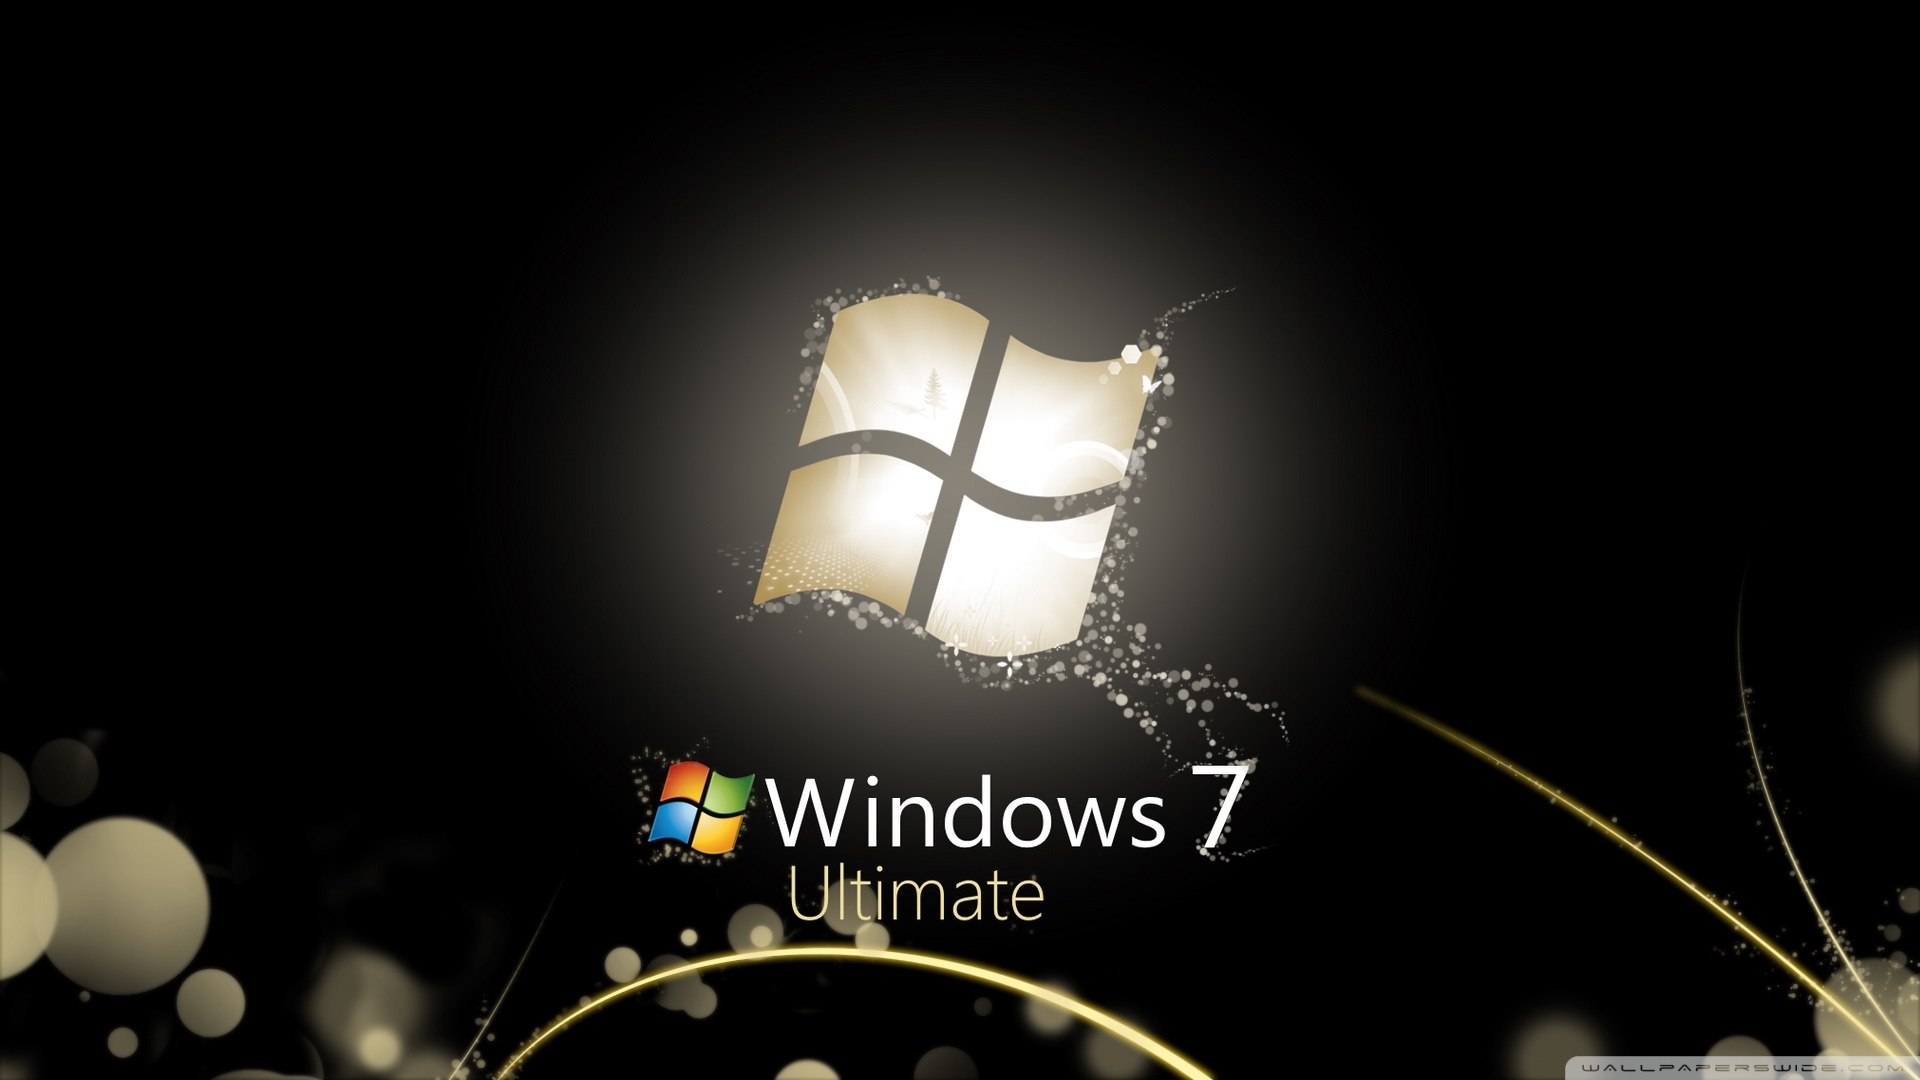 10 New Windows 7 Ultimate Wallpaper 1920X1080 FULL HD 1920×1080 For PC Background